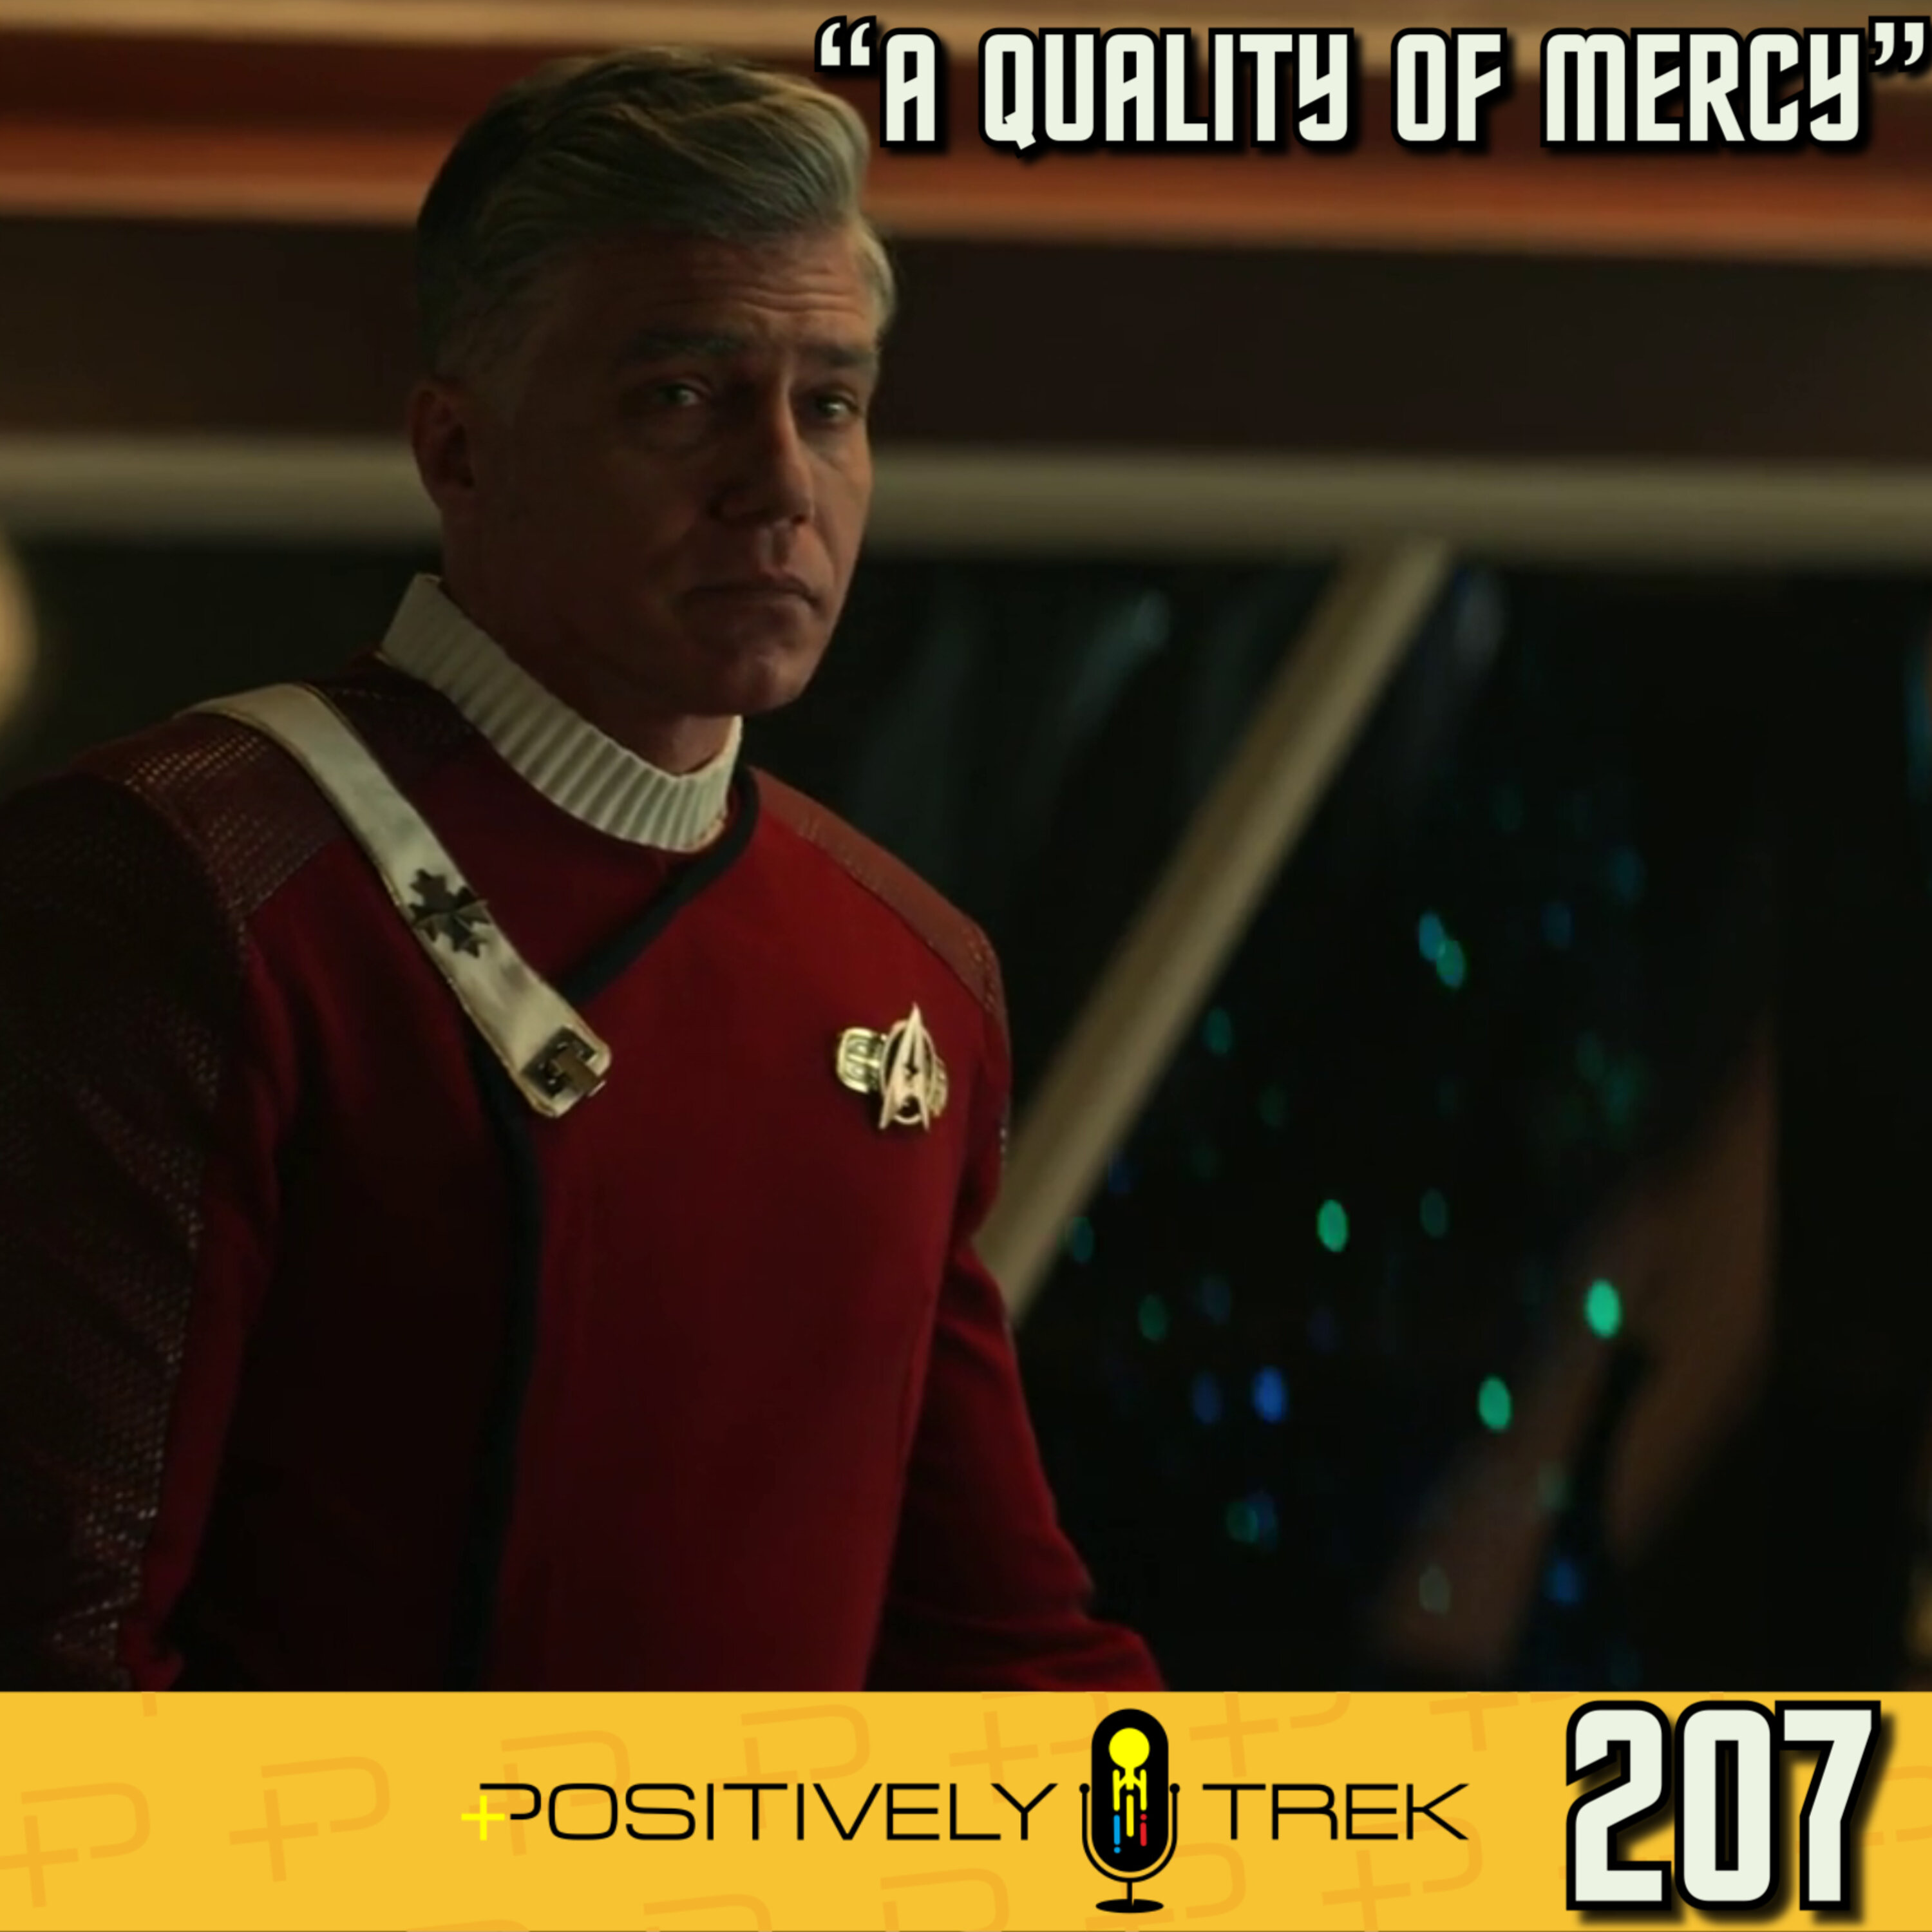 Strange New Worlds Review: “A Quality of Mercy” (Season One Finale!) Image